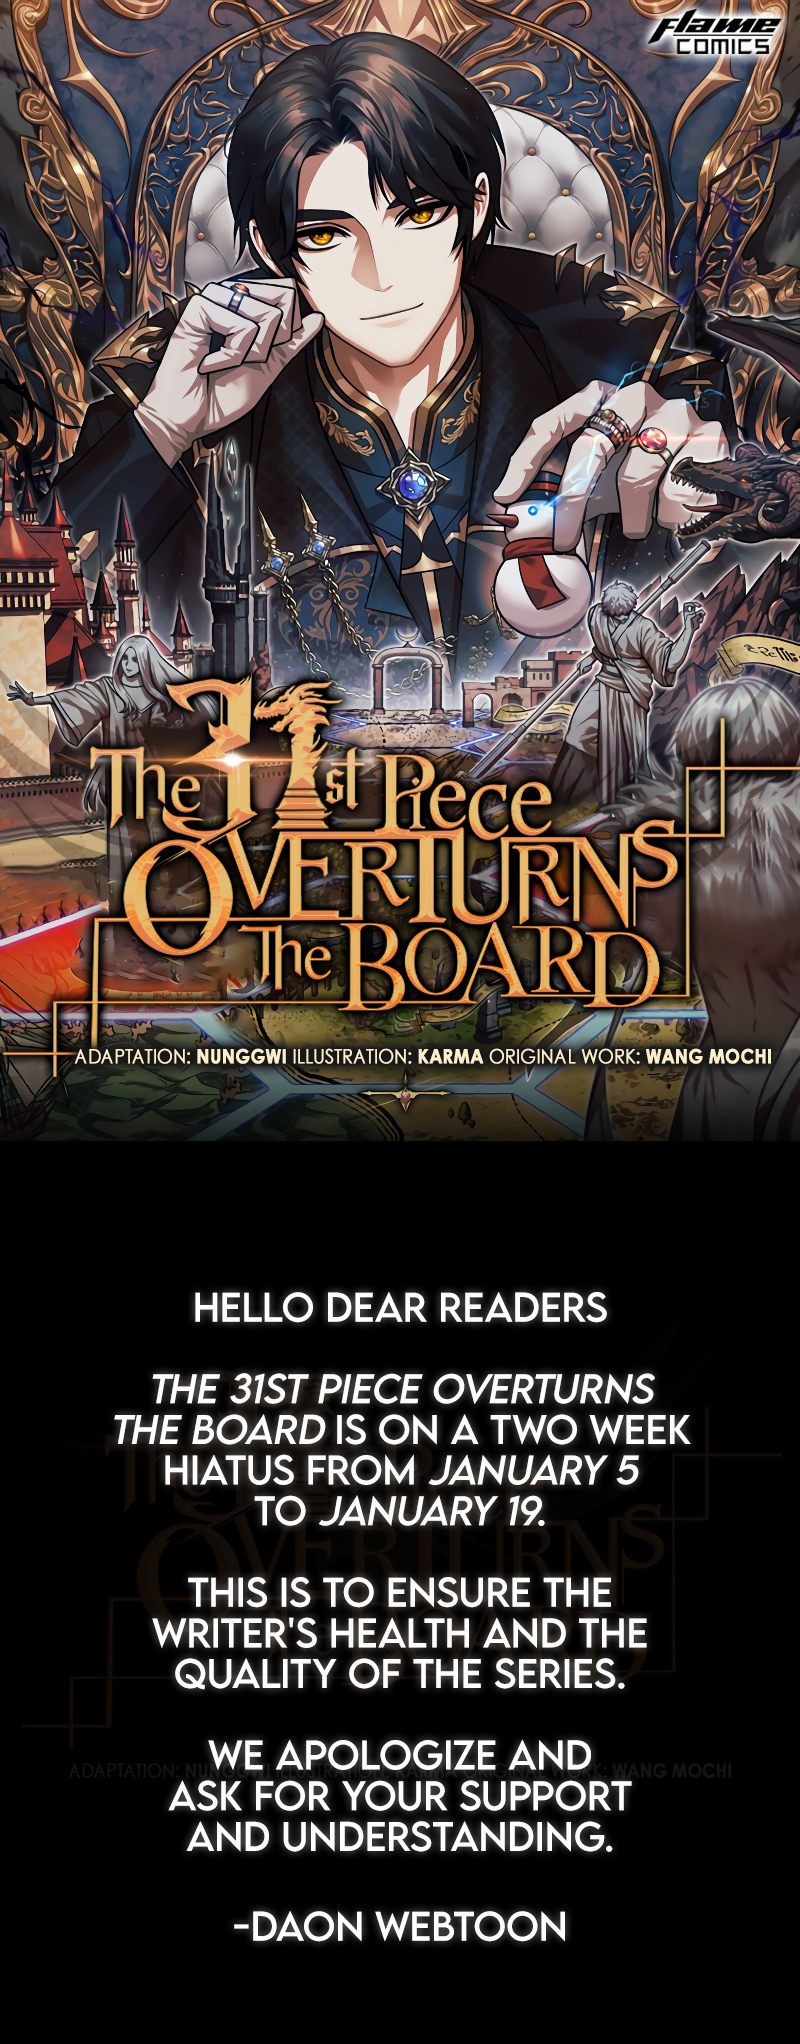 The 31st Piece Overturns the Board - Chapter 32096 - Image 1